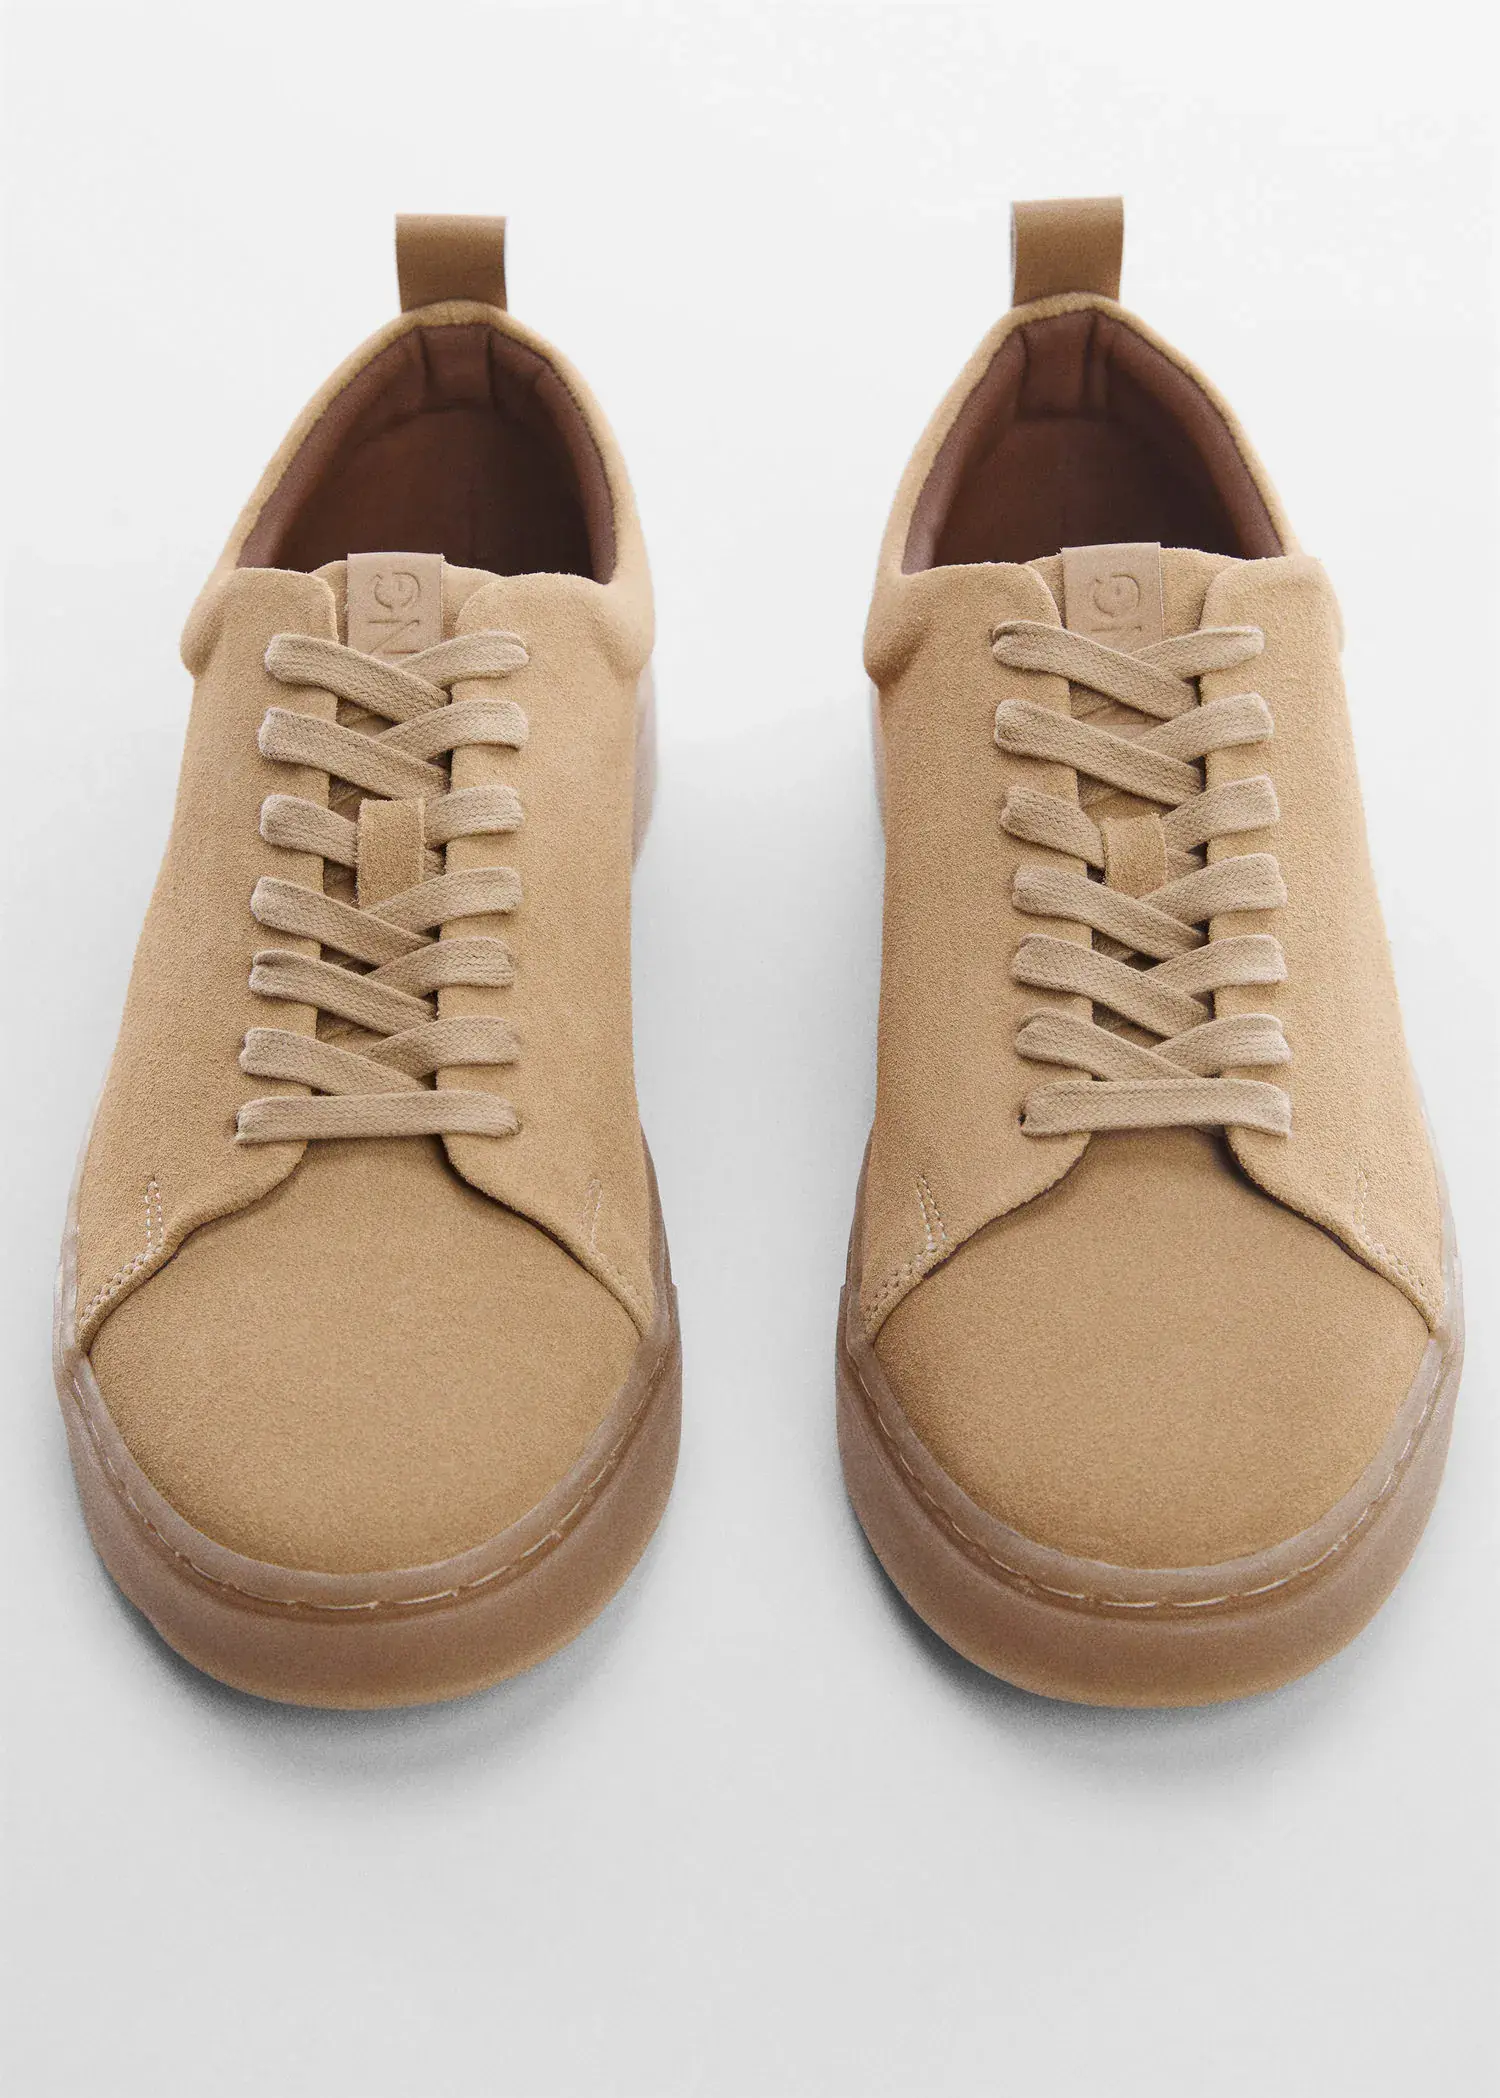 Mango Suede trainers. a close up of a pair of shoes on a table 